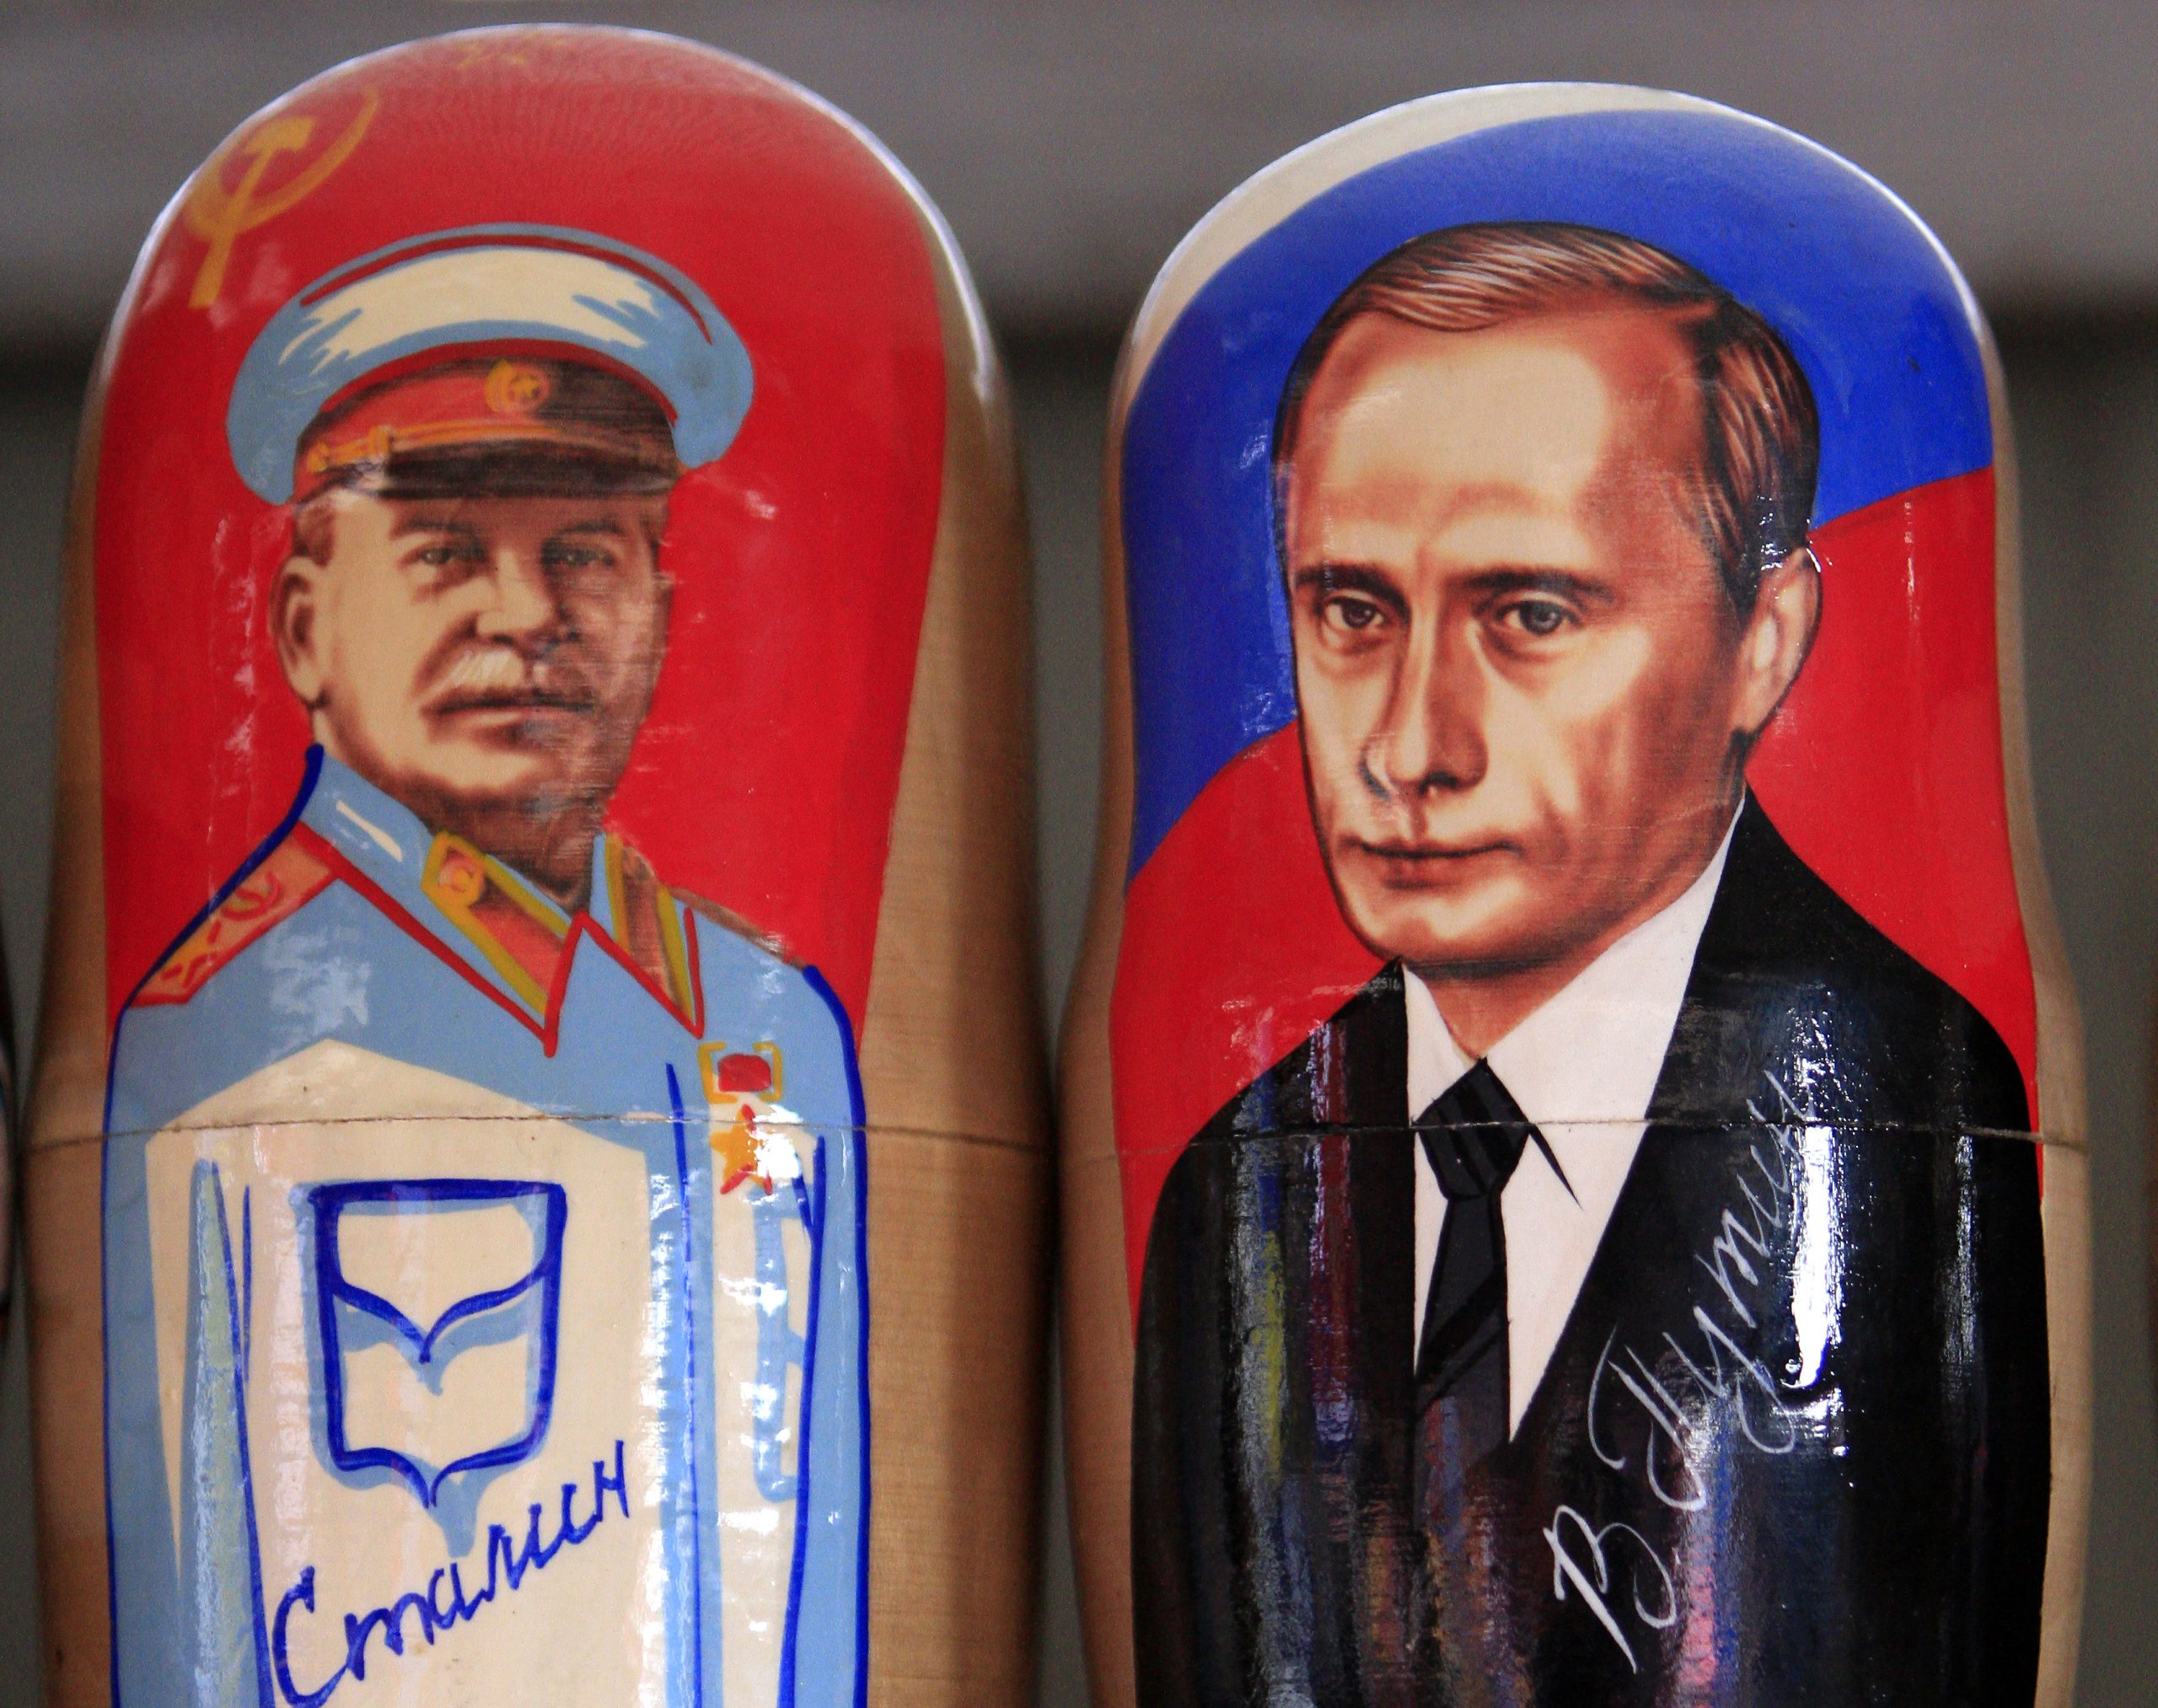 Photo: Traditional Matryoshka dolls or Russian nesting dolls bearing the faces of Russia's president elect and current Prime Minister Vladimir Putin and former Soviet dictator Josef Stalin are seen in a souvenir shop in Kiev March 5, 2012. Credit: REUTERS/Stringer